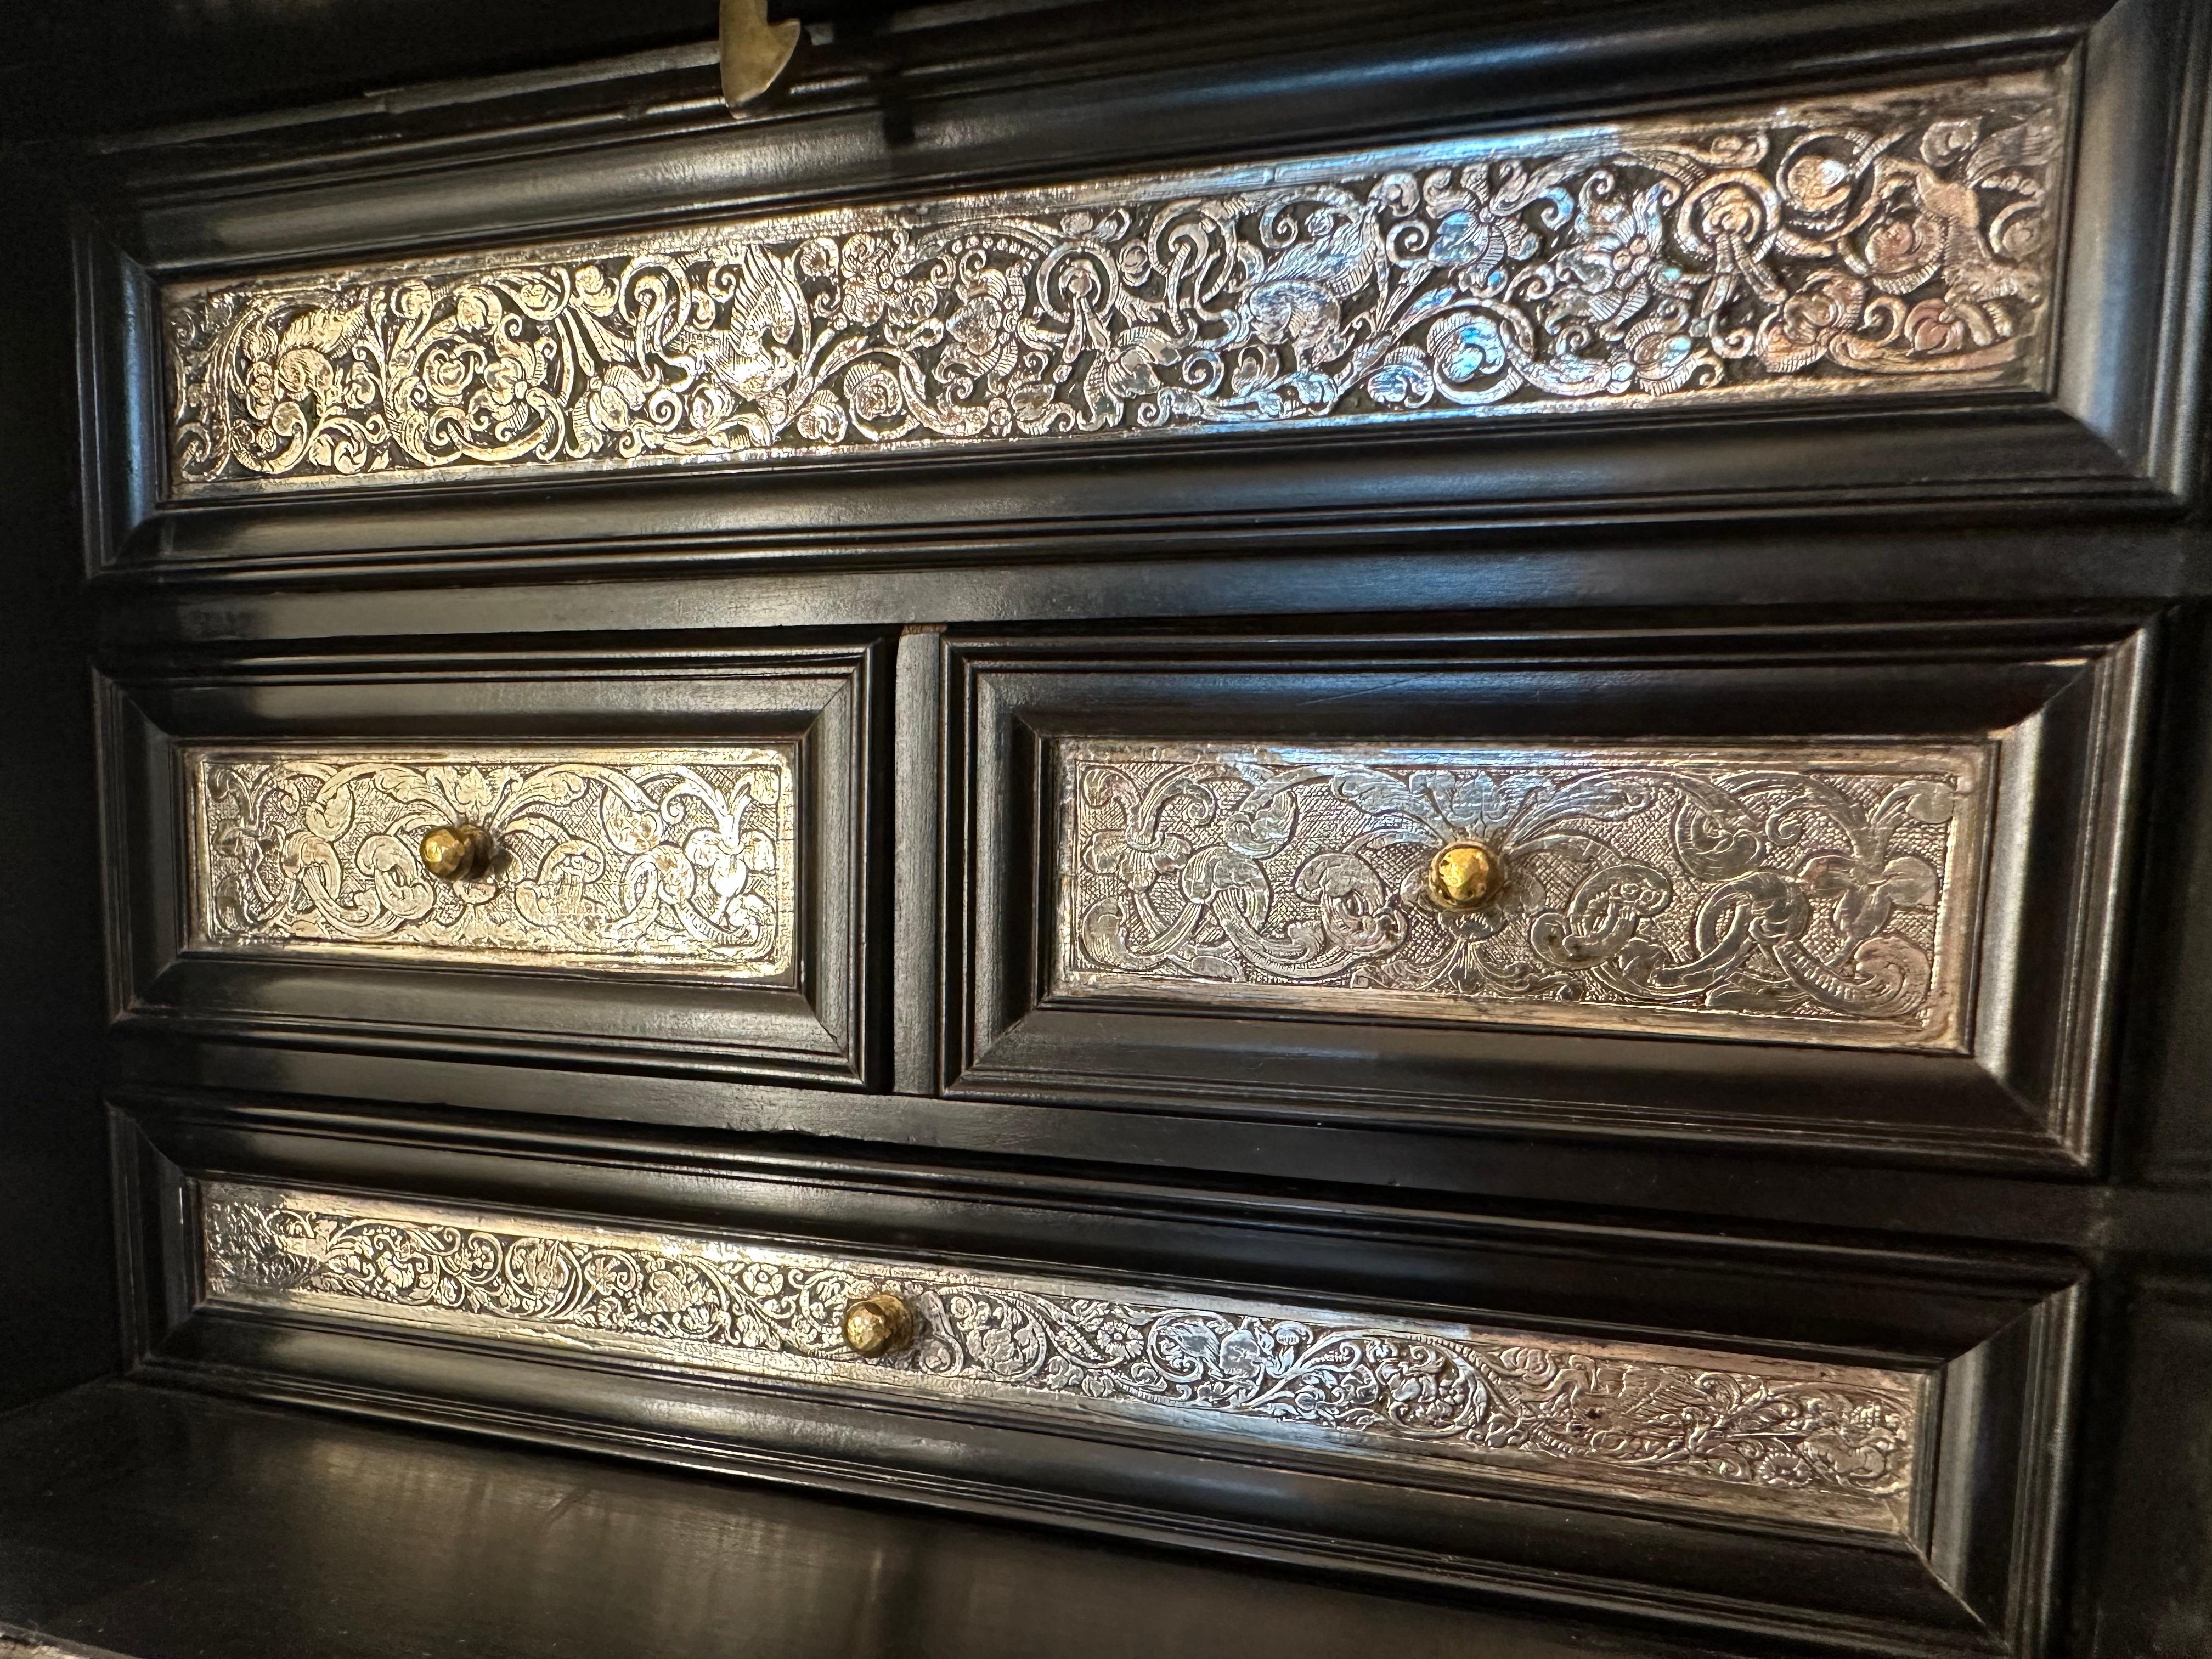 Rare 17th Century Baroque Ebony with Silver Cabinet, Antwerp, Wunderkammer For Sale 10